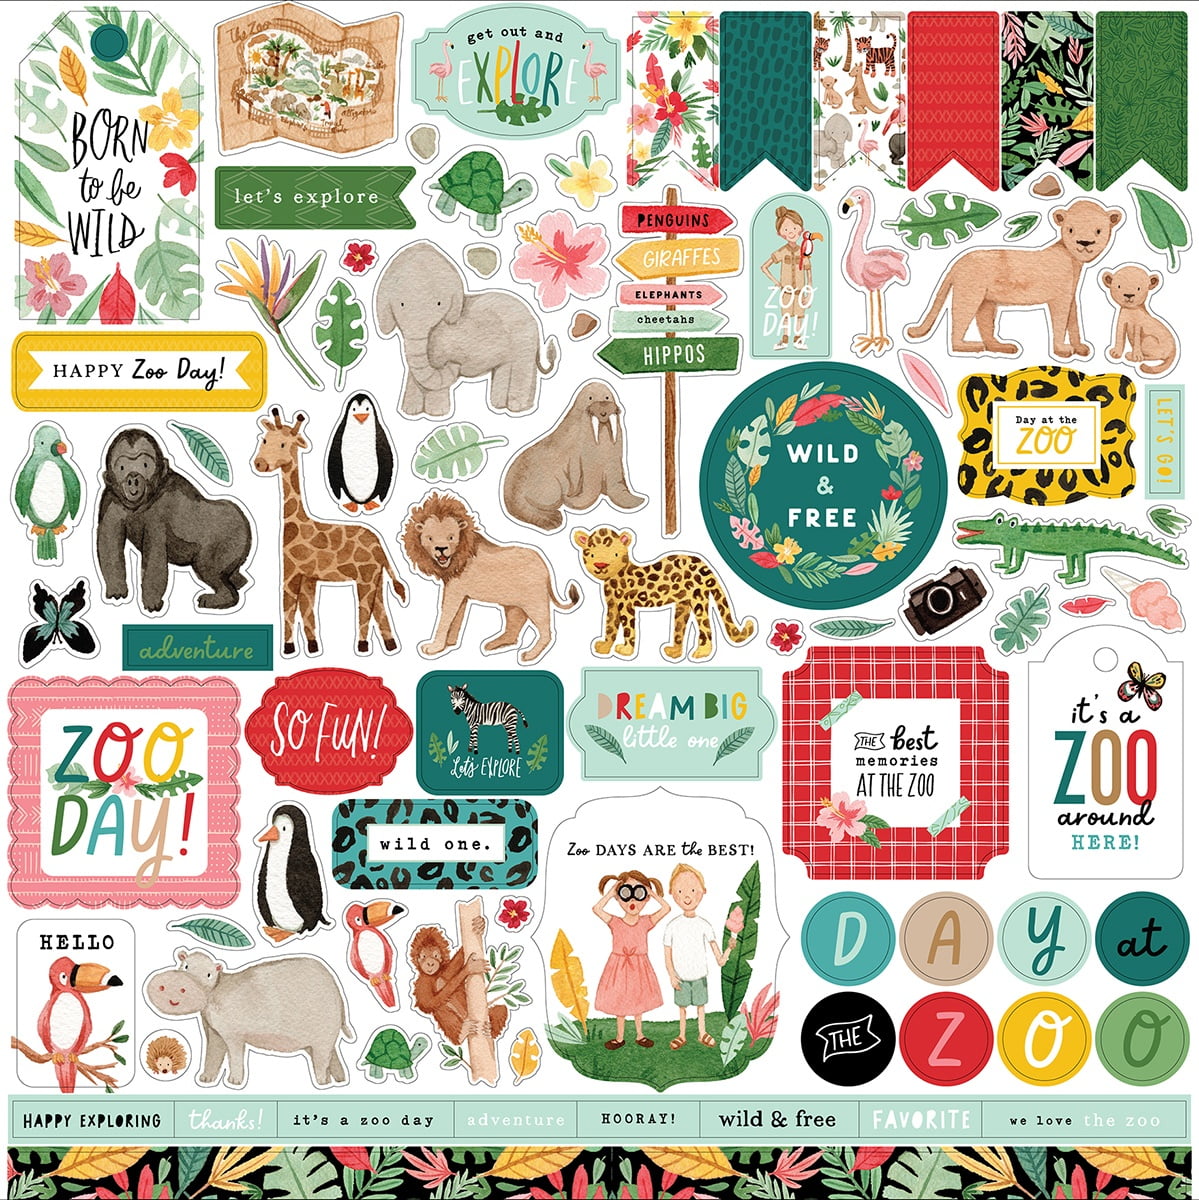 Stickers « Animaux de Noël » - VBS Hobby